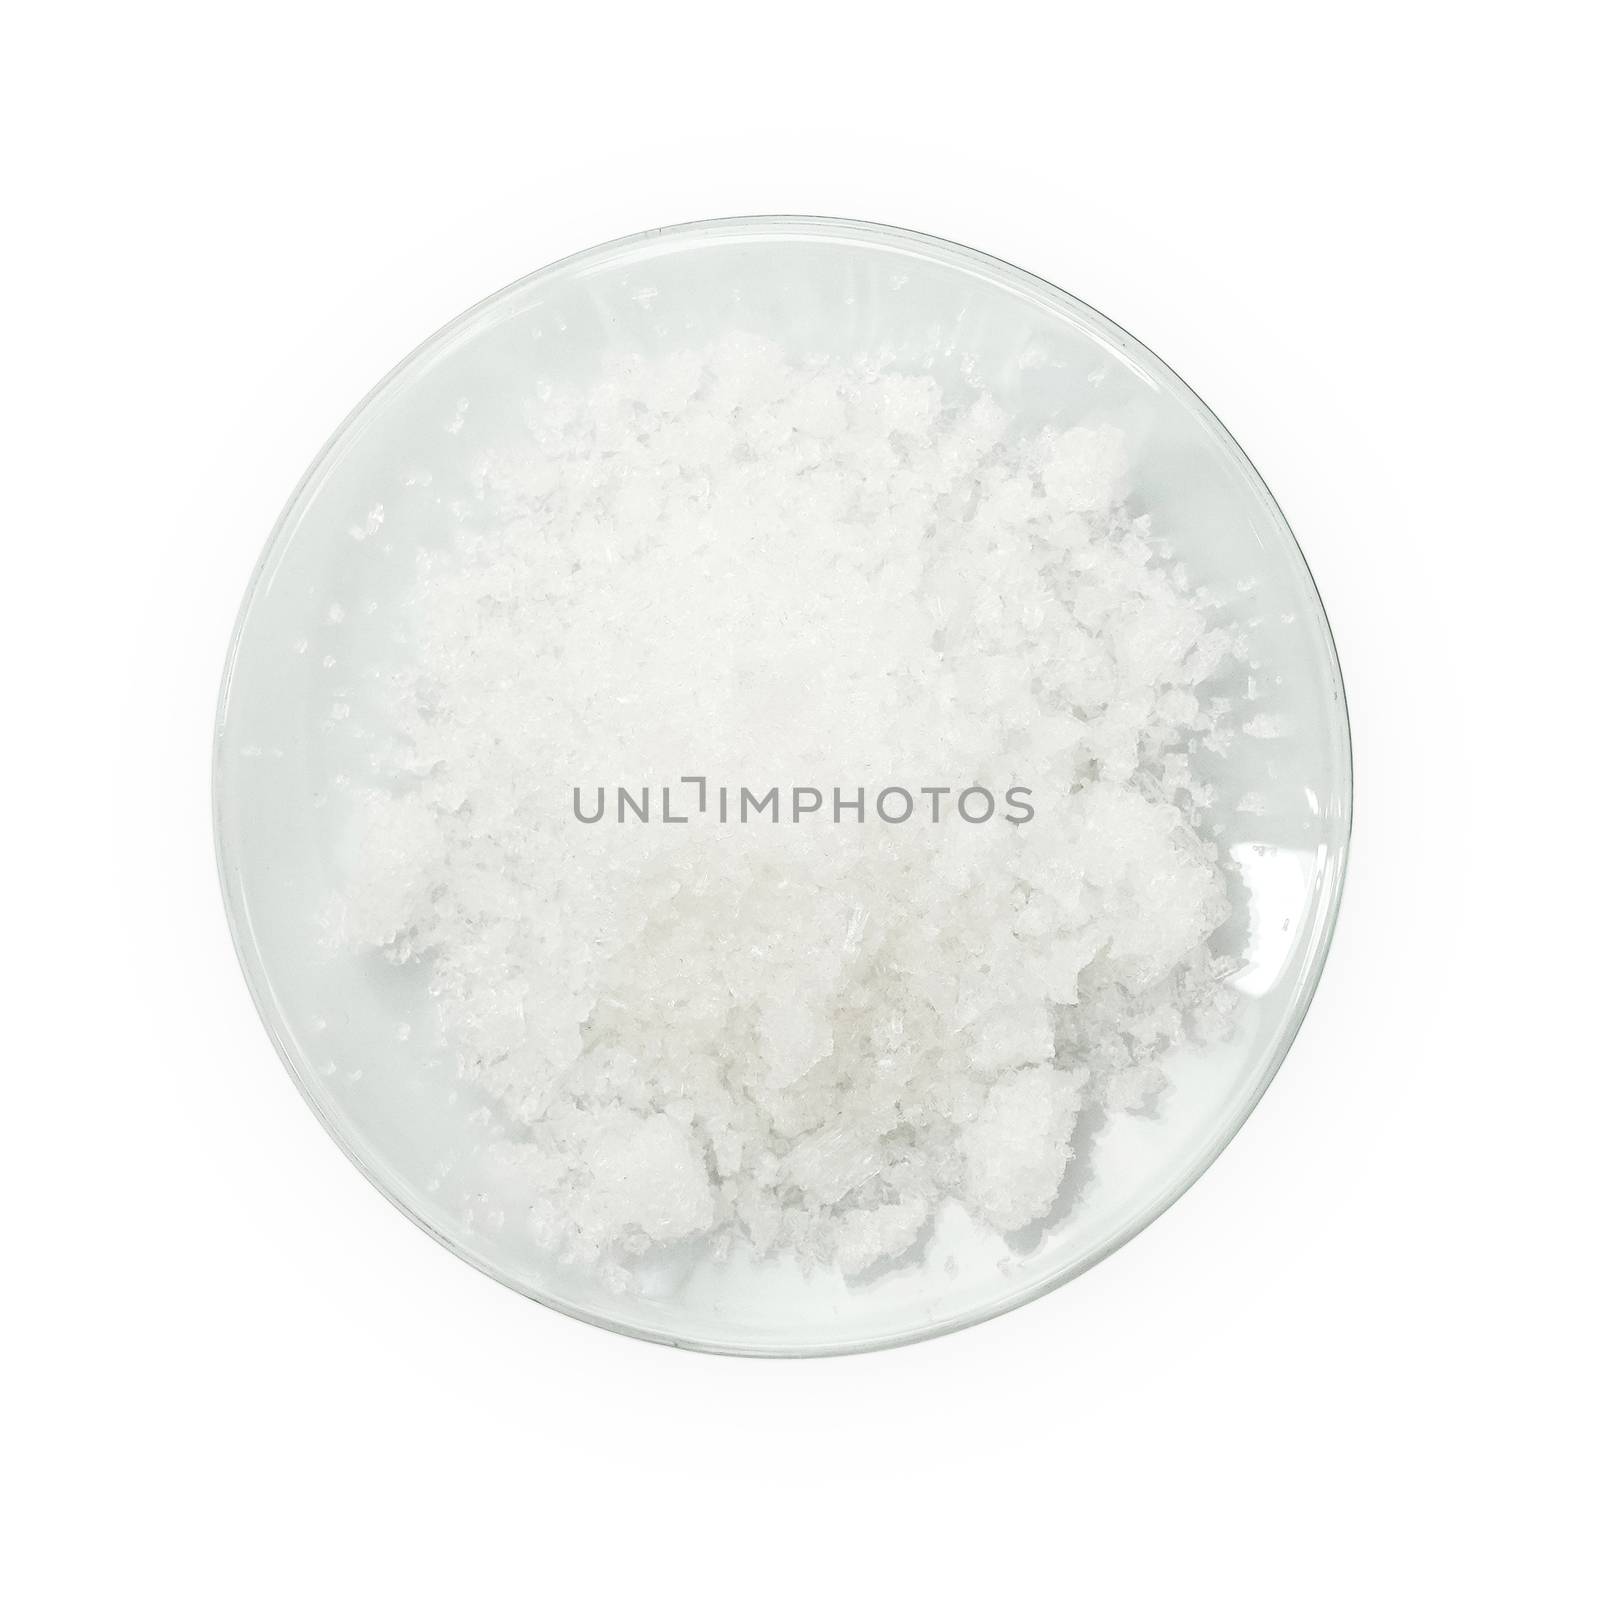 Potassium chloride (KCl), a metal halide salt composed of potassium and chlorine. KCl is used as a fertilizer, in medicine, in scientific applications, and in food processing.